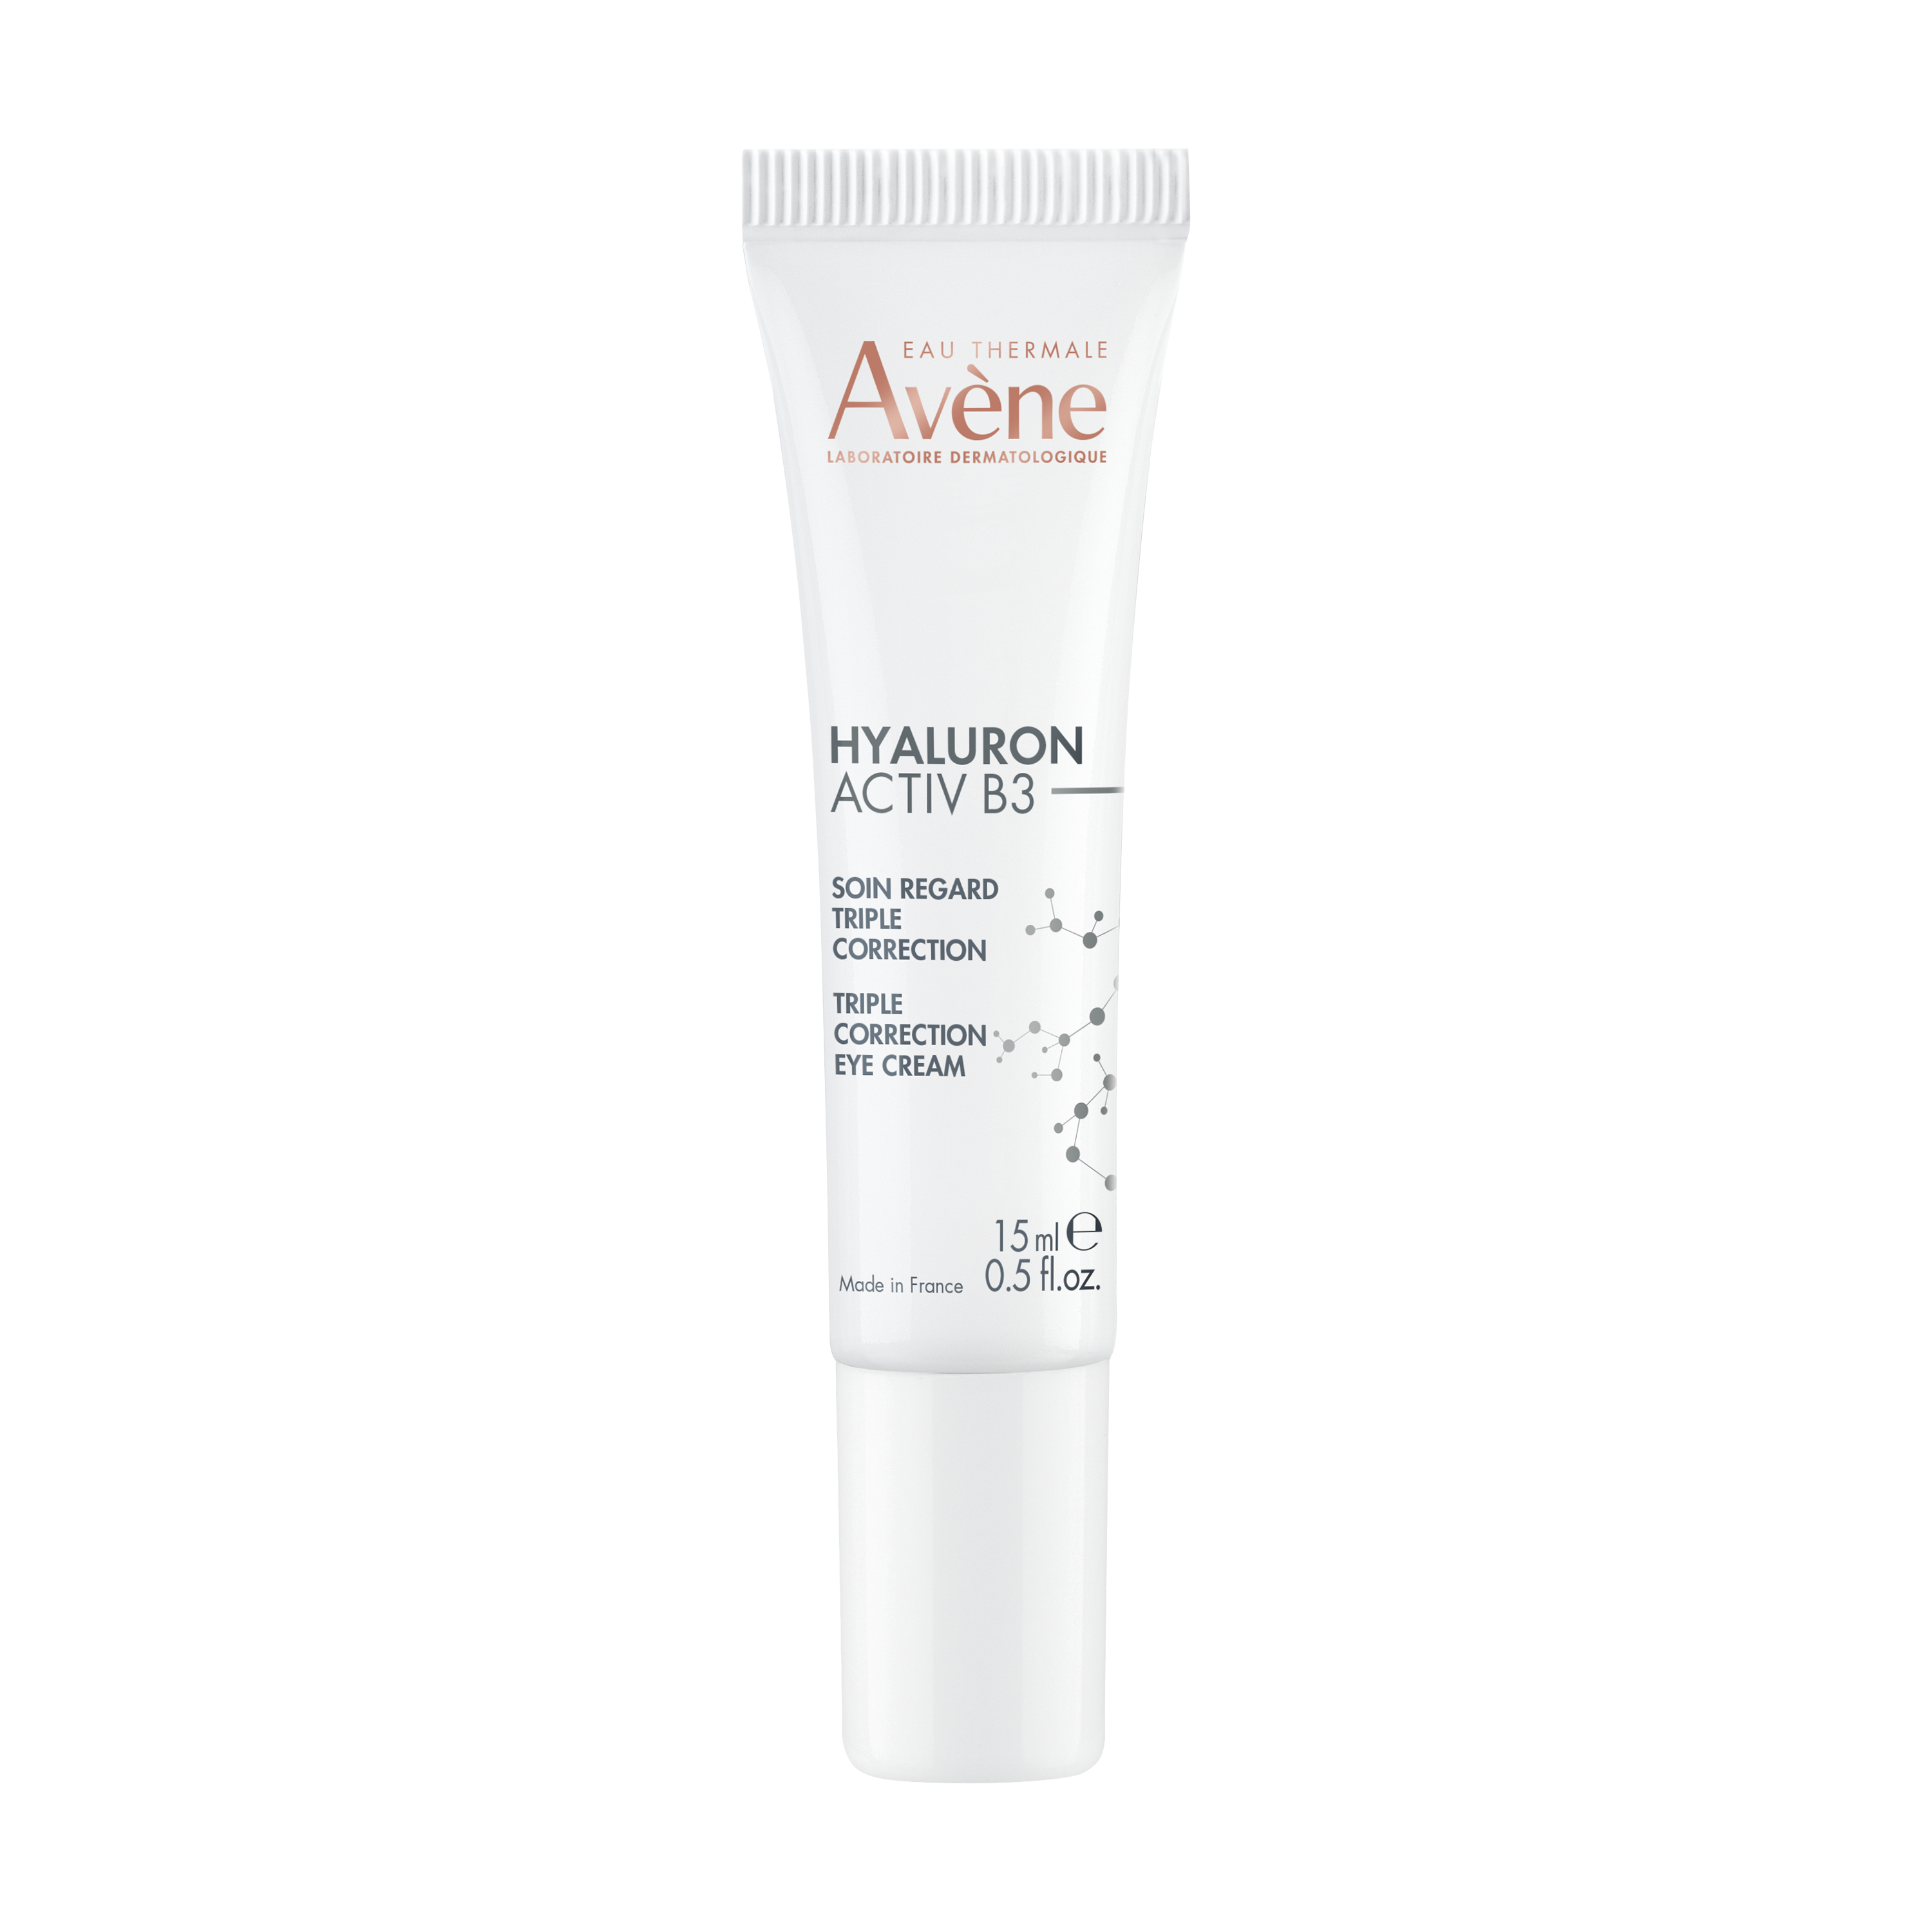 Avène Hyaluron Active B3 Creme Contorno Olhos 15ml  